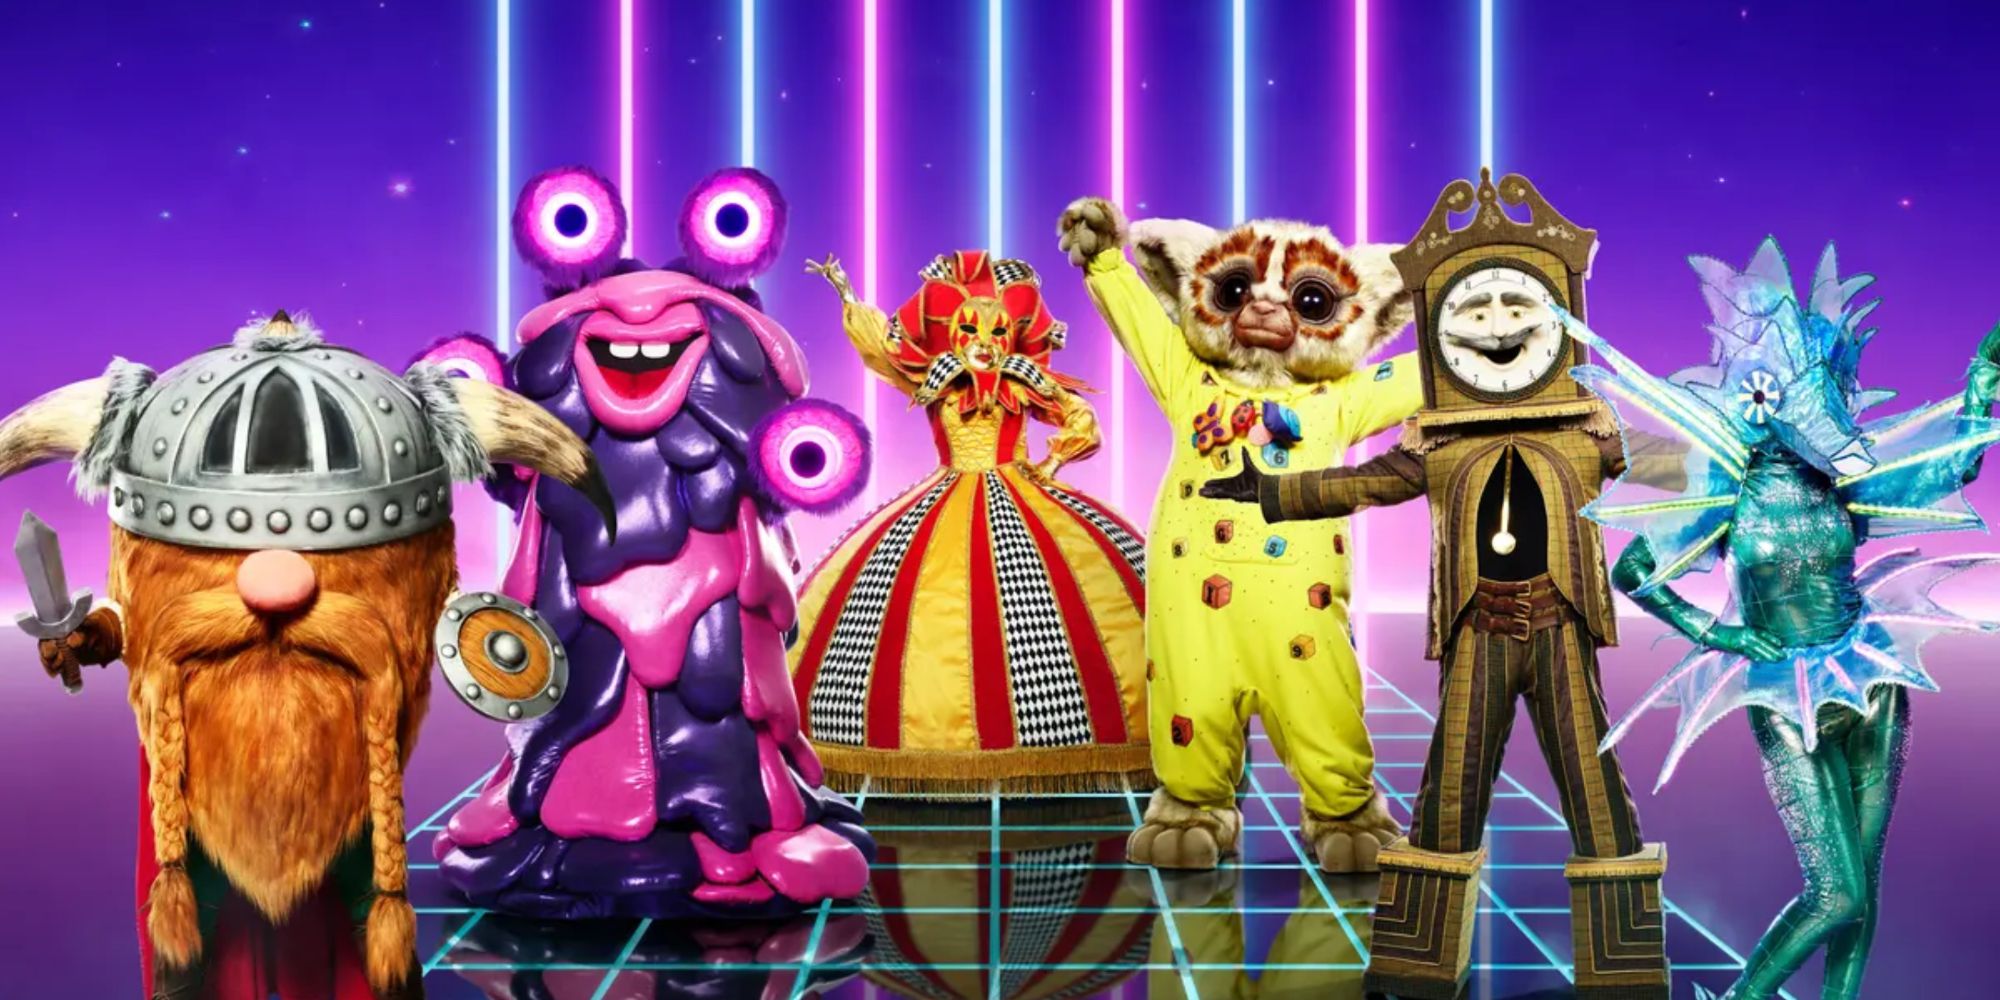 Charicature/mascots from the masked singer including a seahorse, a grandfather clock, a viking, and various silly creatures